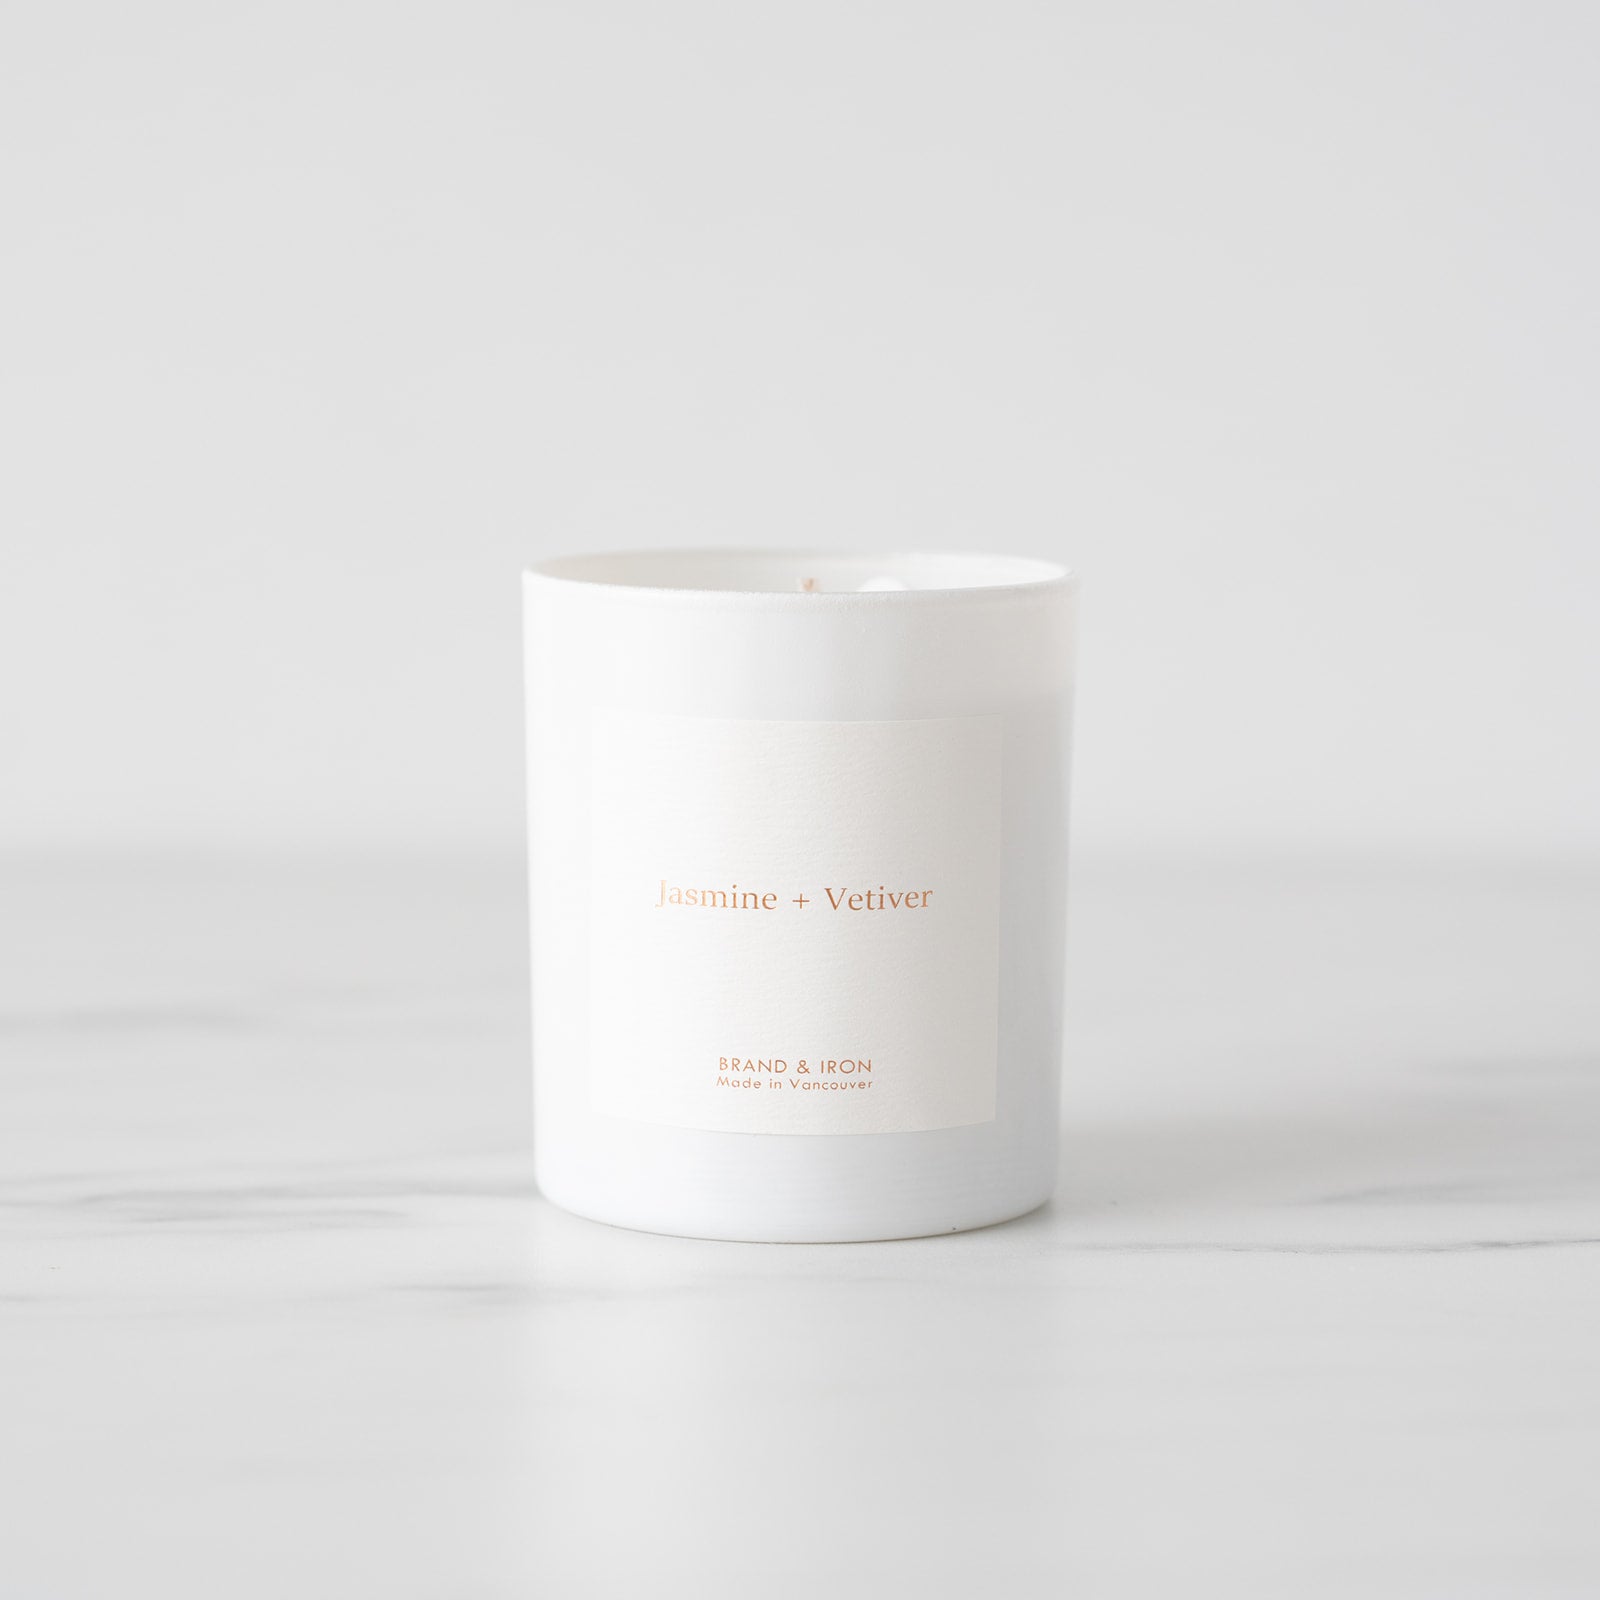 Jasmine & Vetiver Home Series Candle